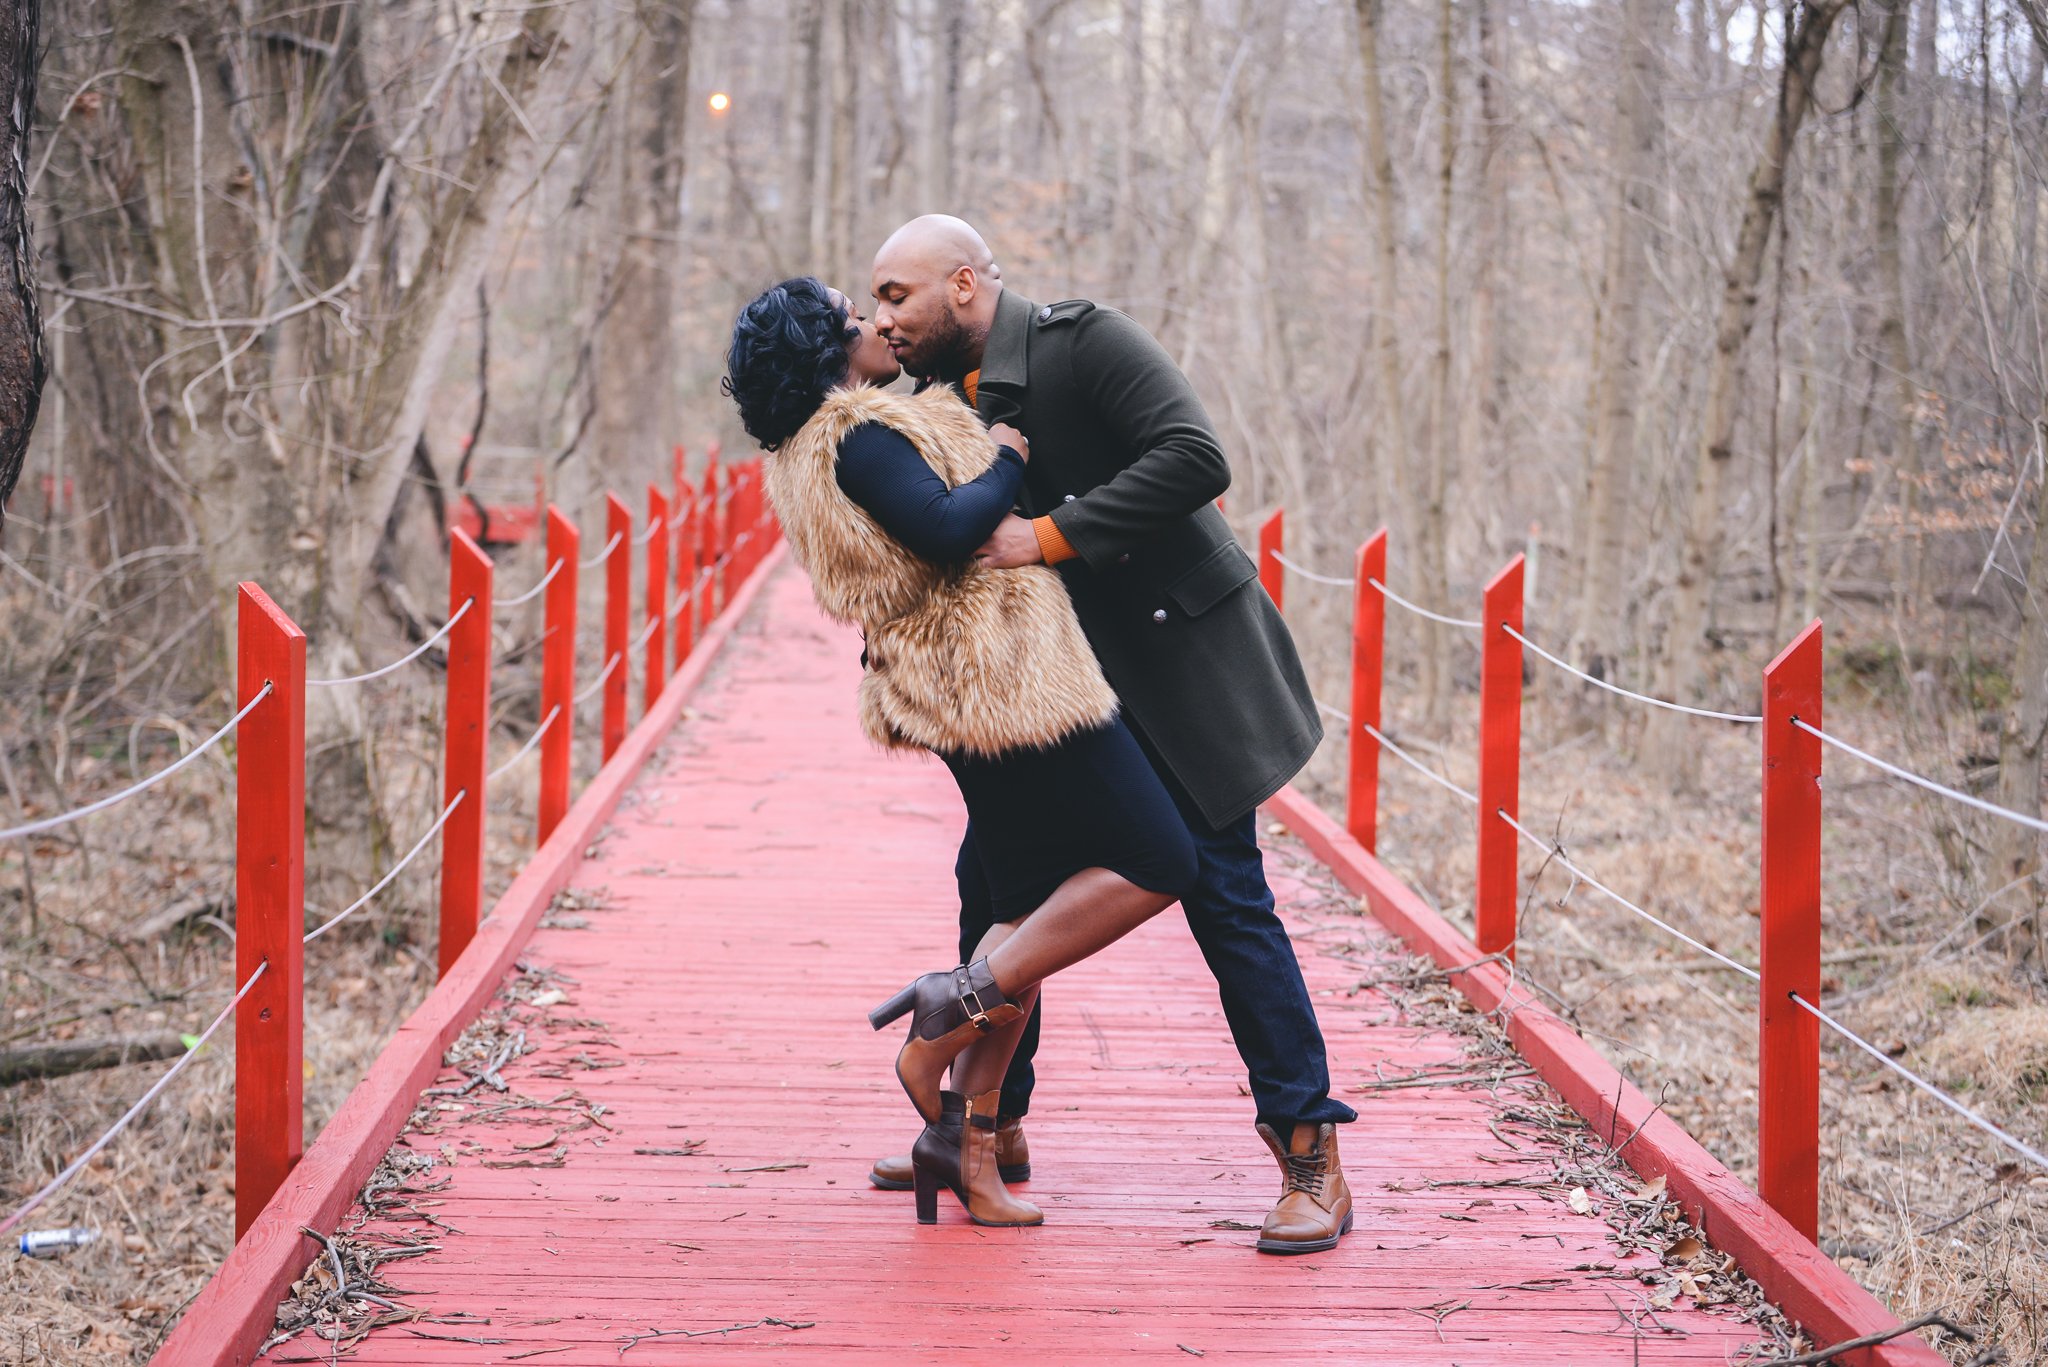  Engagement photo session in College Park, MD 